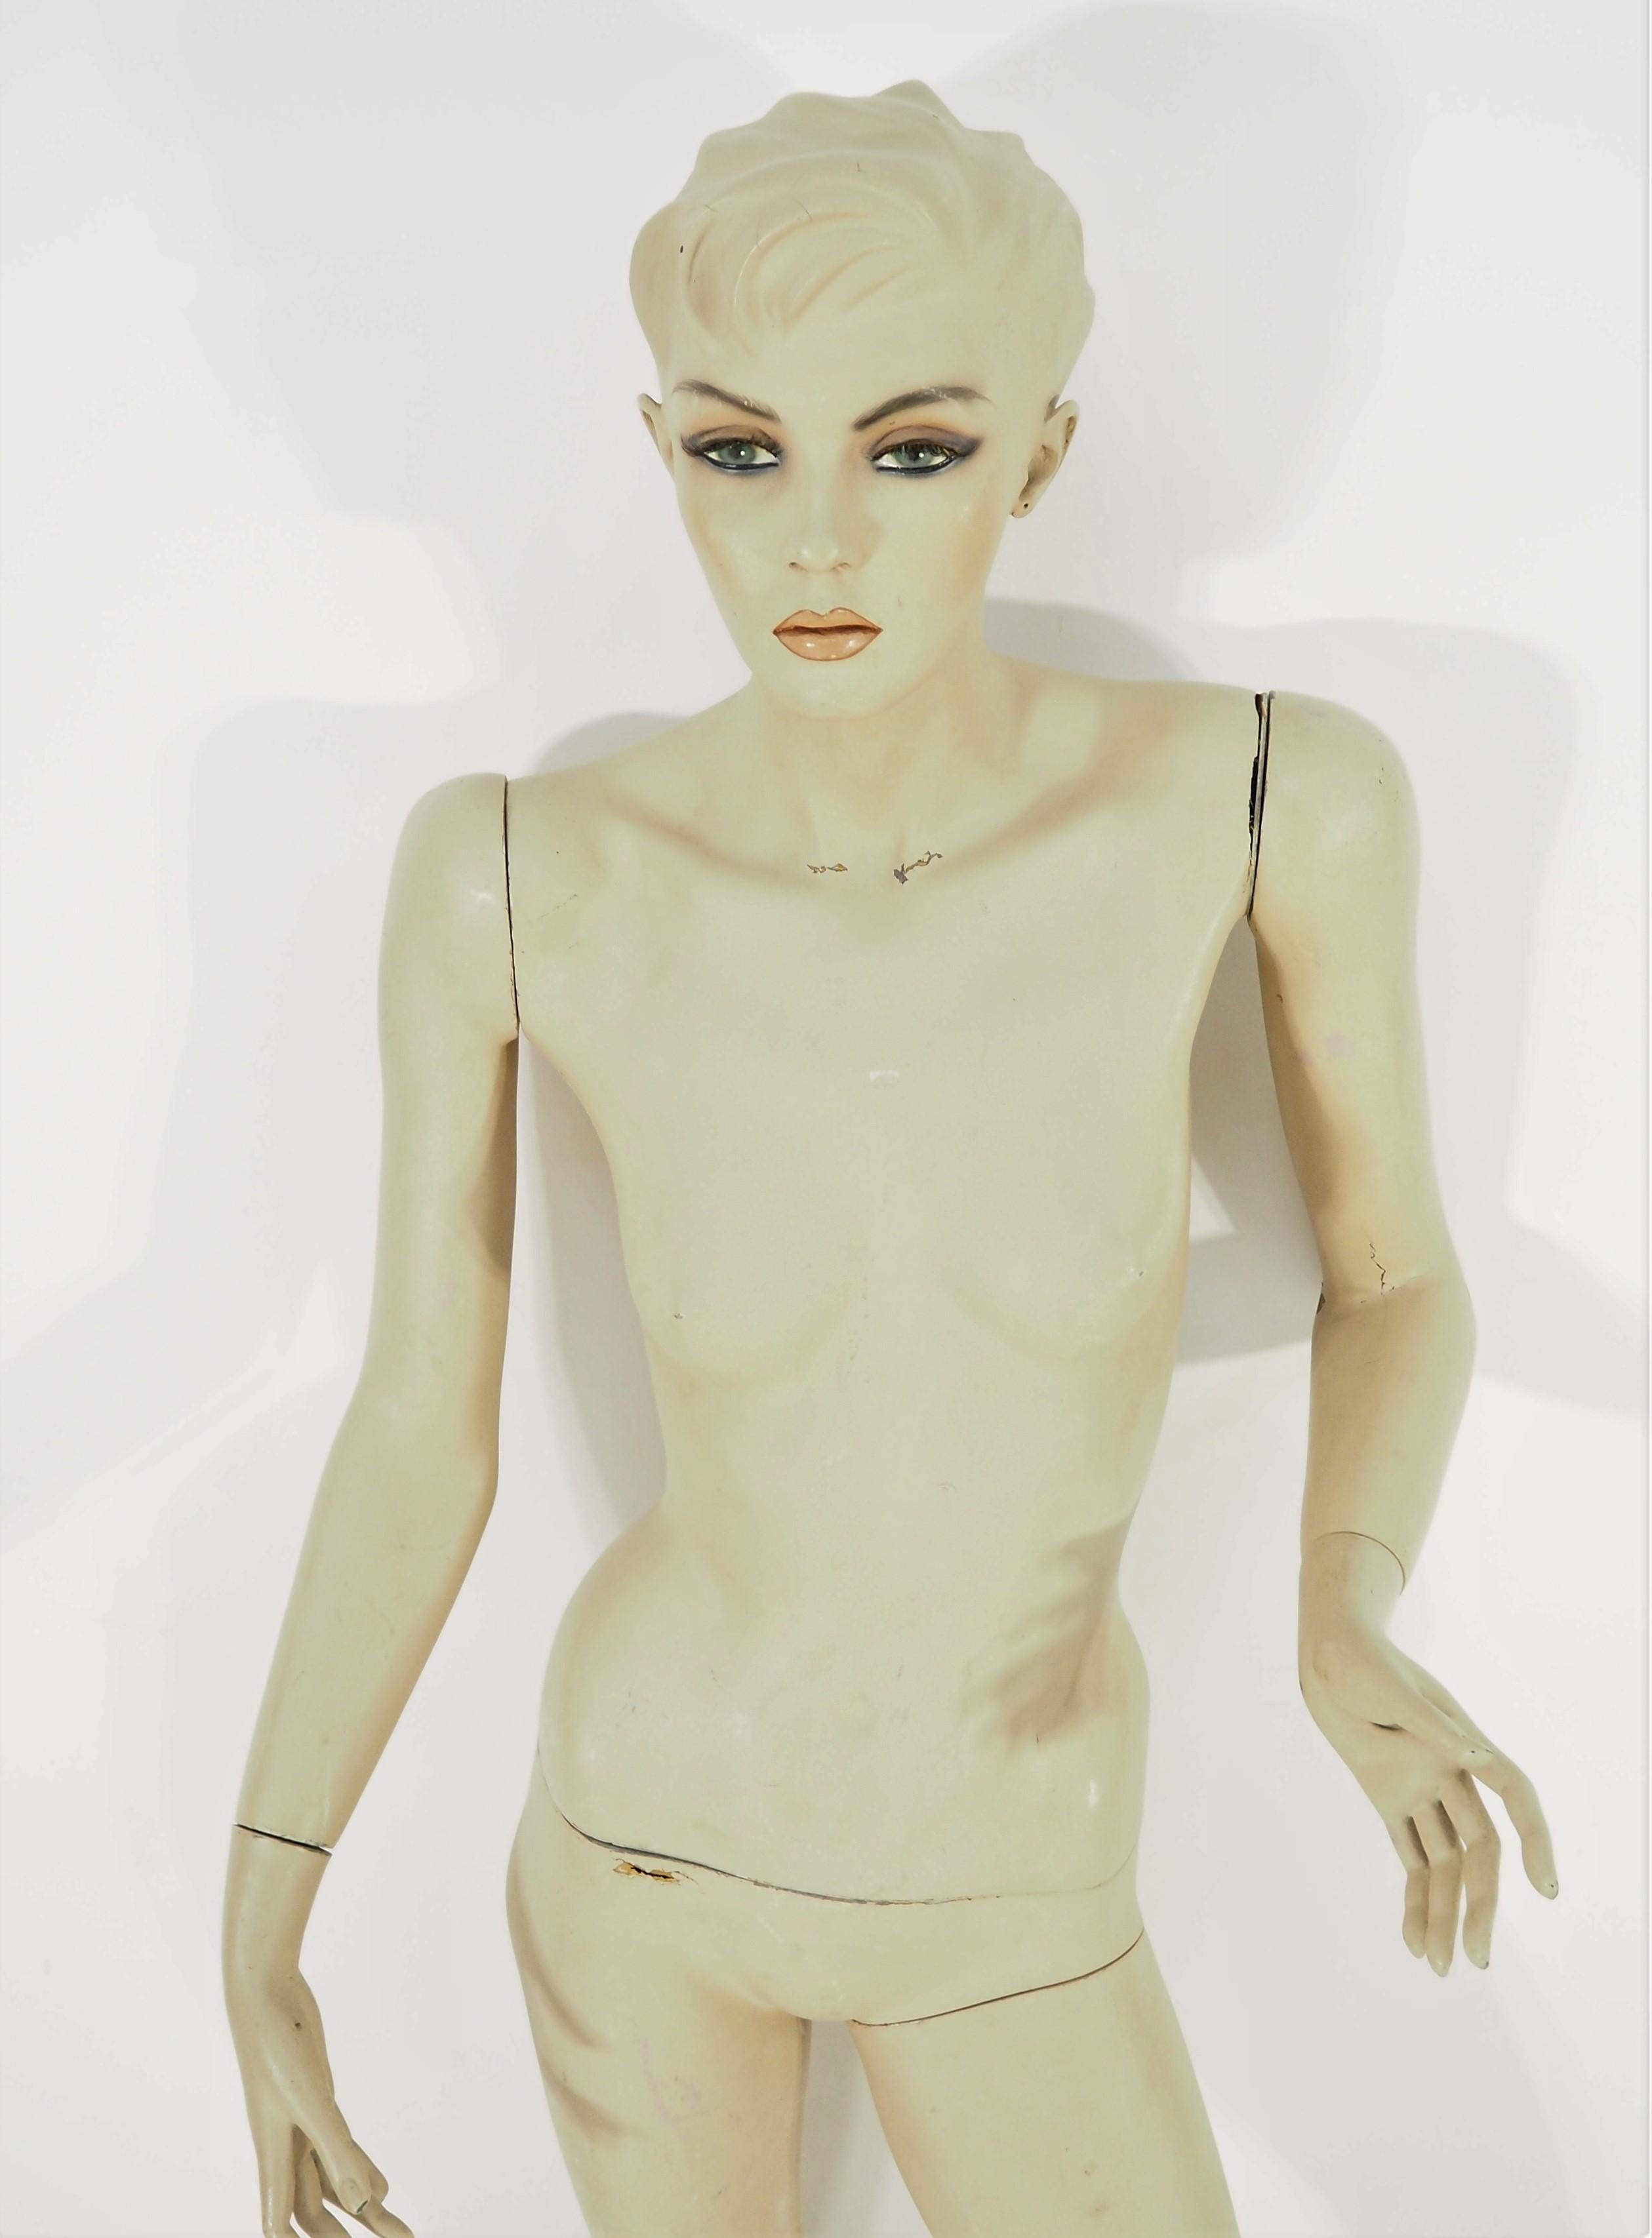 Lifesize Mannequin, 1960s. Original condition. A lot of cavities.
 